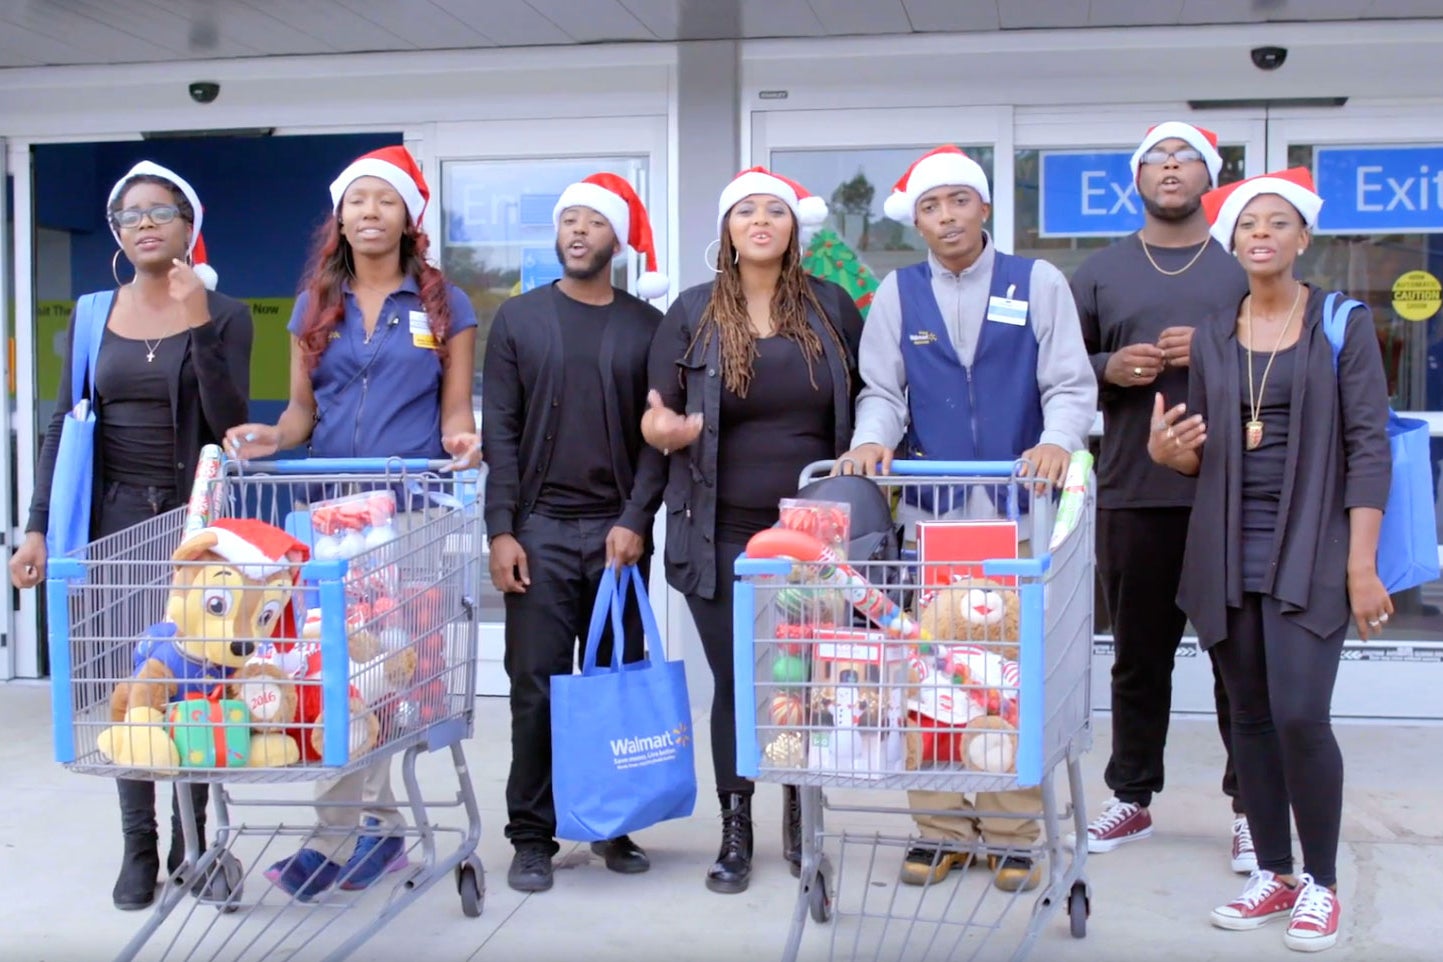 SPONSORED: Surprise! Local Shoppers Receive a Lovely Gift of Cheer
